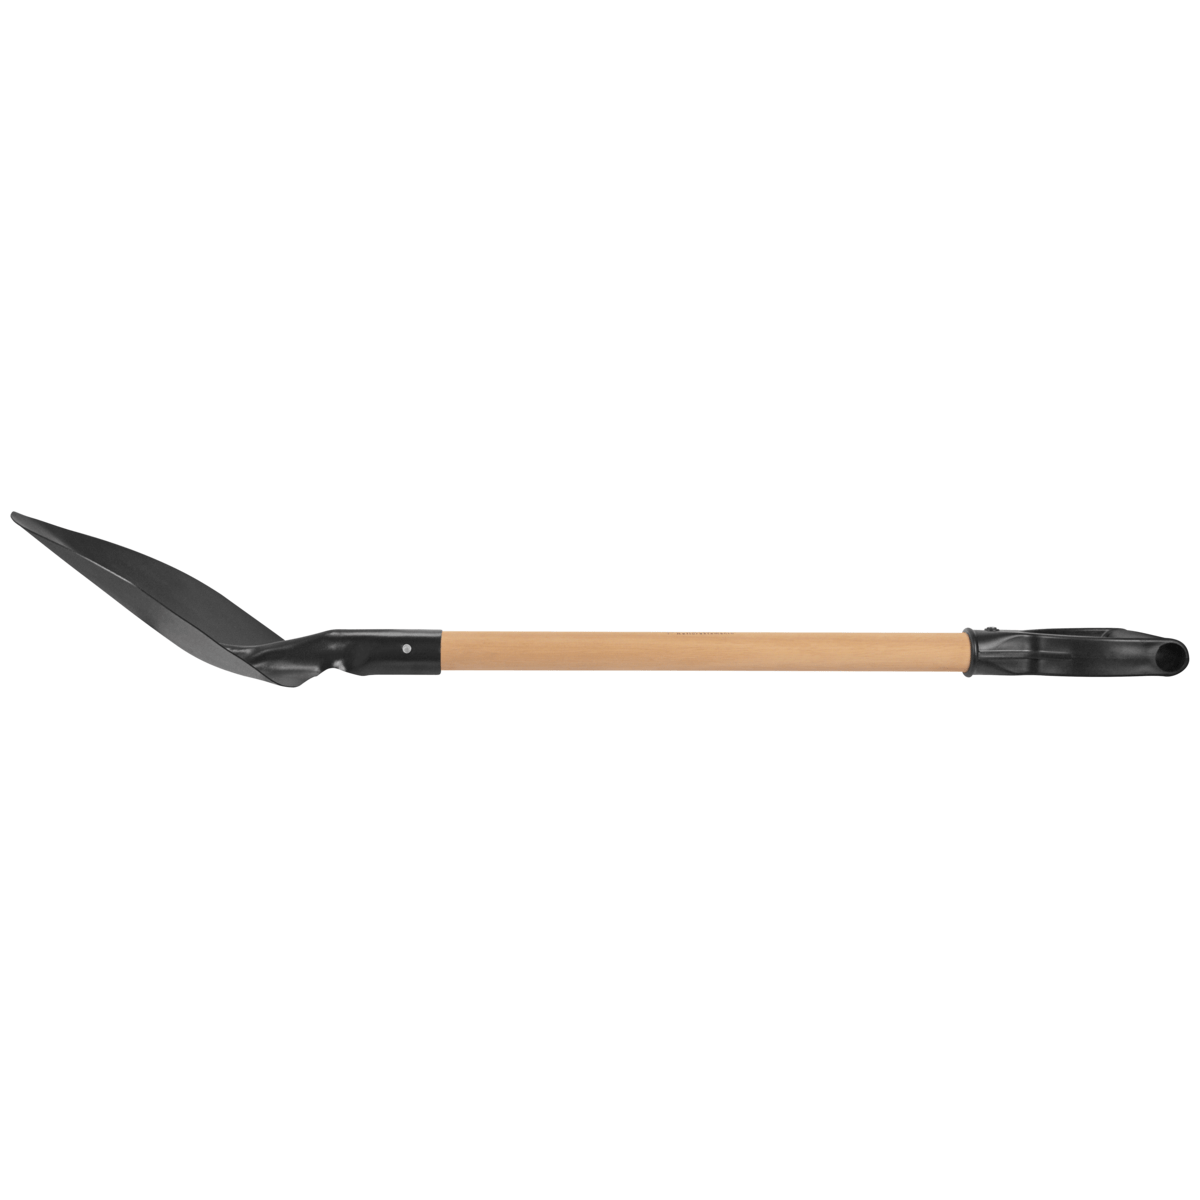 Tramontina Round Mouth Shovel with 71cm Wooden Handle | Supply Master | Accra, Ghana Tools Building Steel Engineering Hardware tool